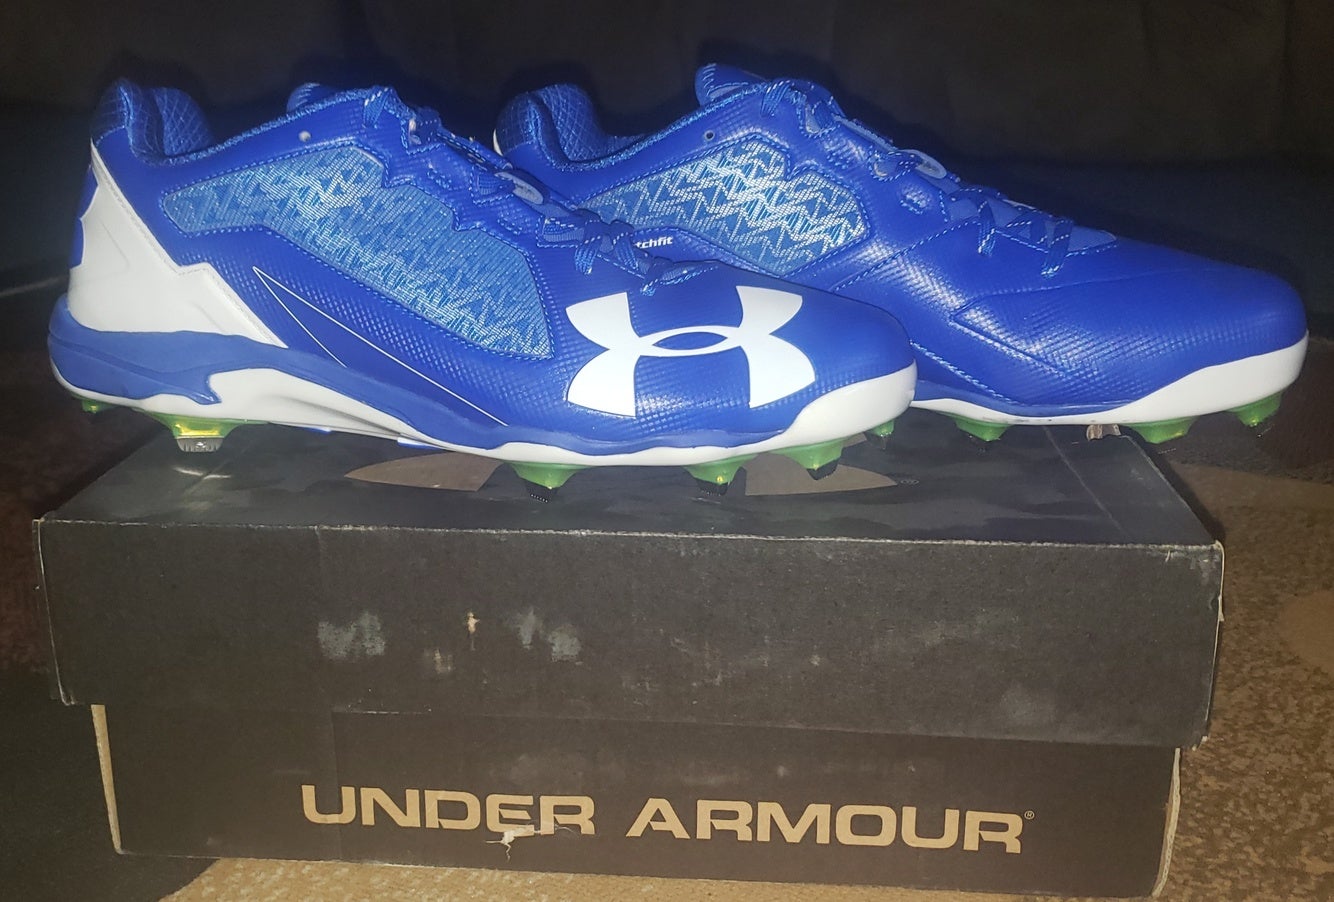 BRAND NEW IN BOX Under Armour Deception Low Metal Baseball Cleats Size 11.5 